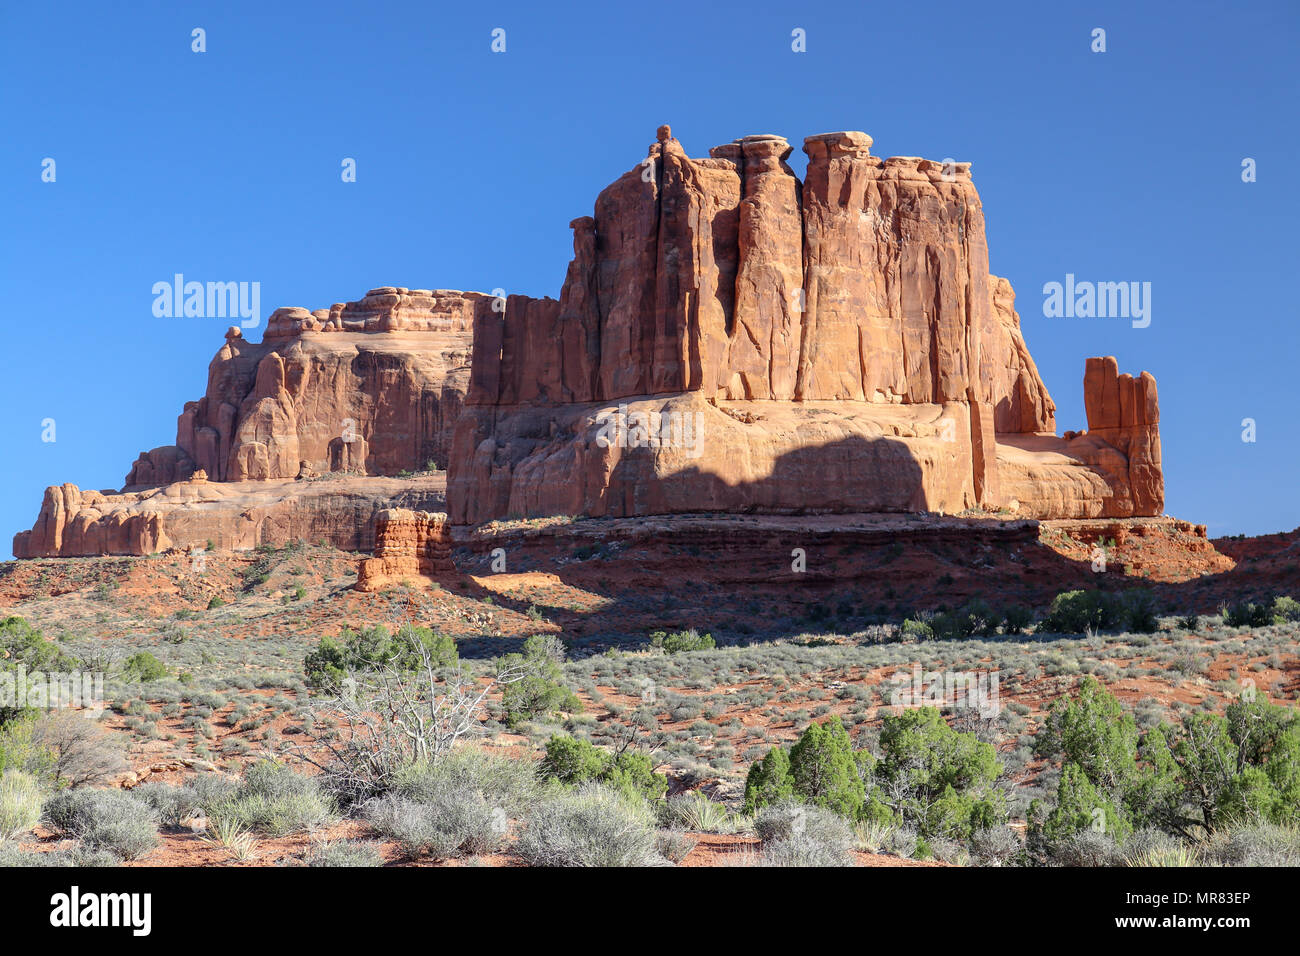 The towering rock formations at the Arches National Park Petrified Dunes Stock Photo